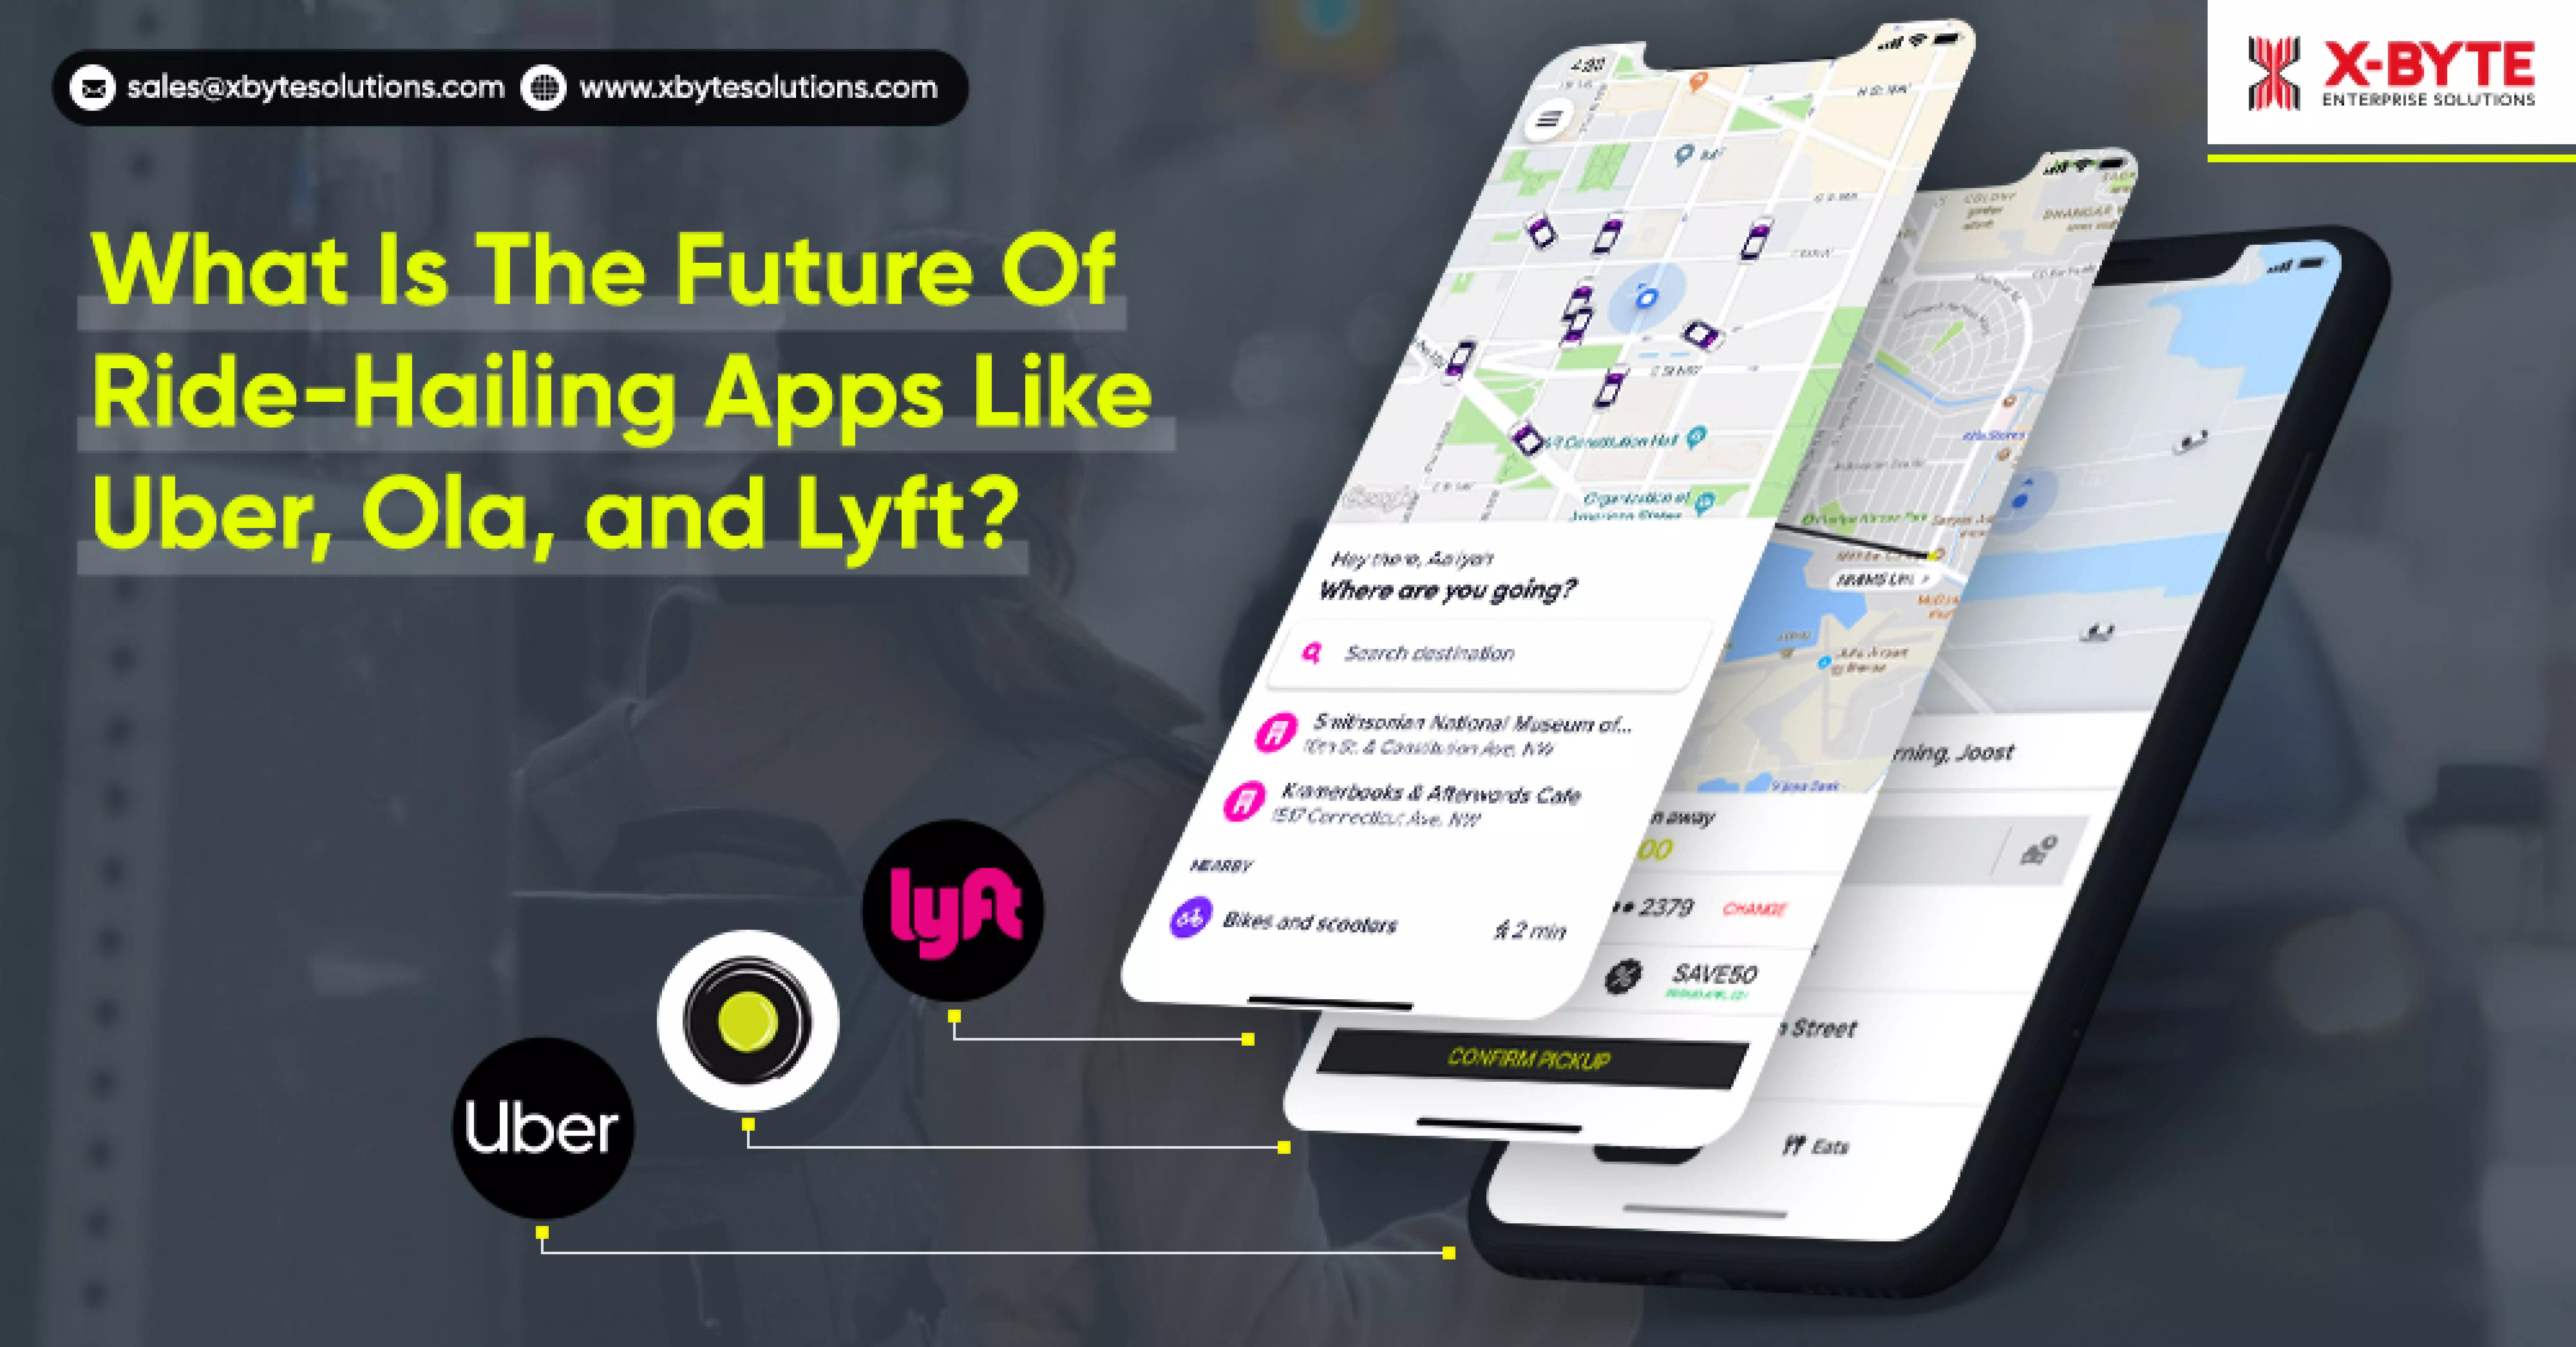 What Is The Future Of Ride-Hailing Apps Like Uber, Ola, and Lyft